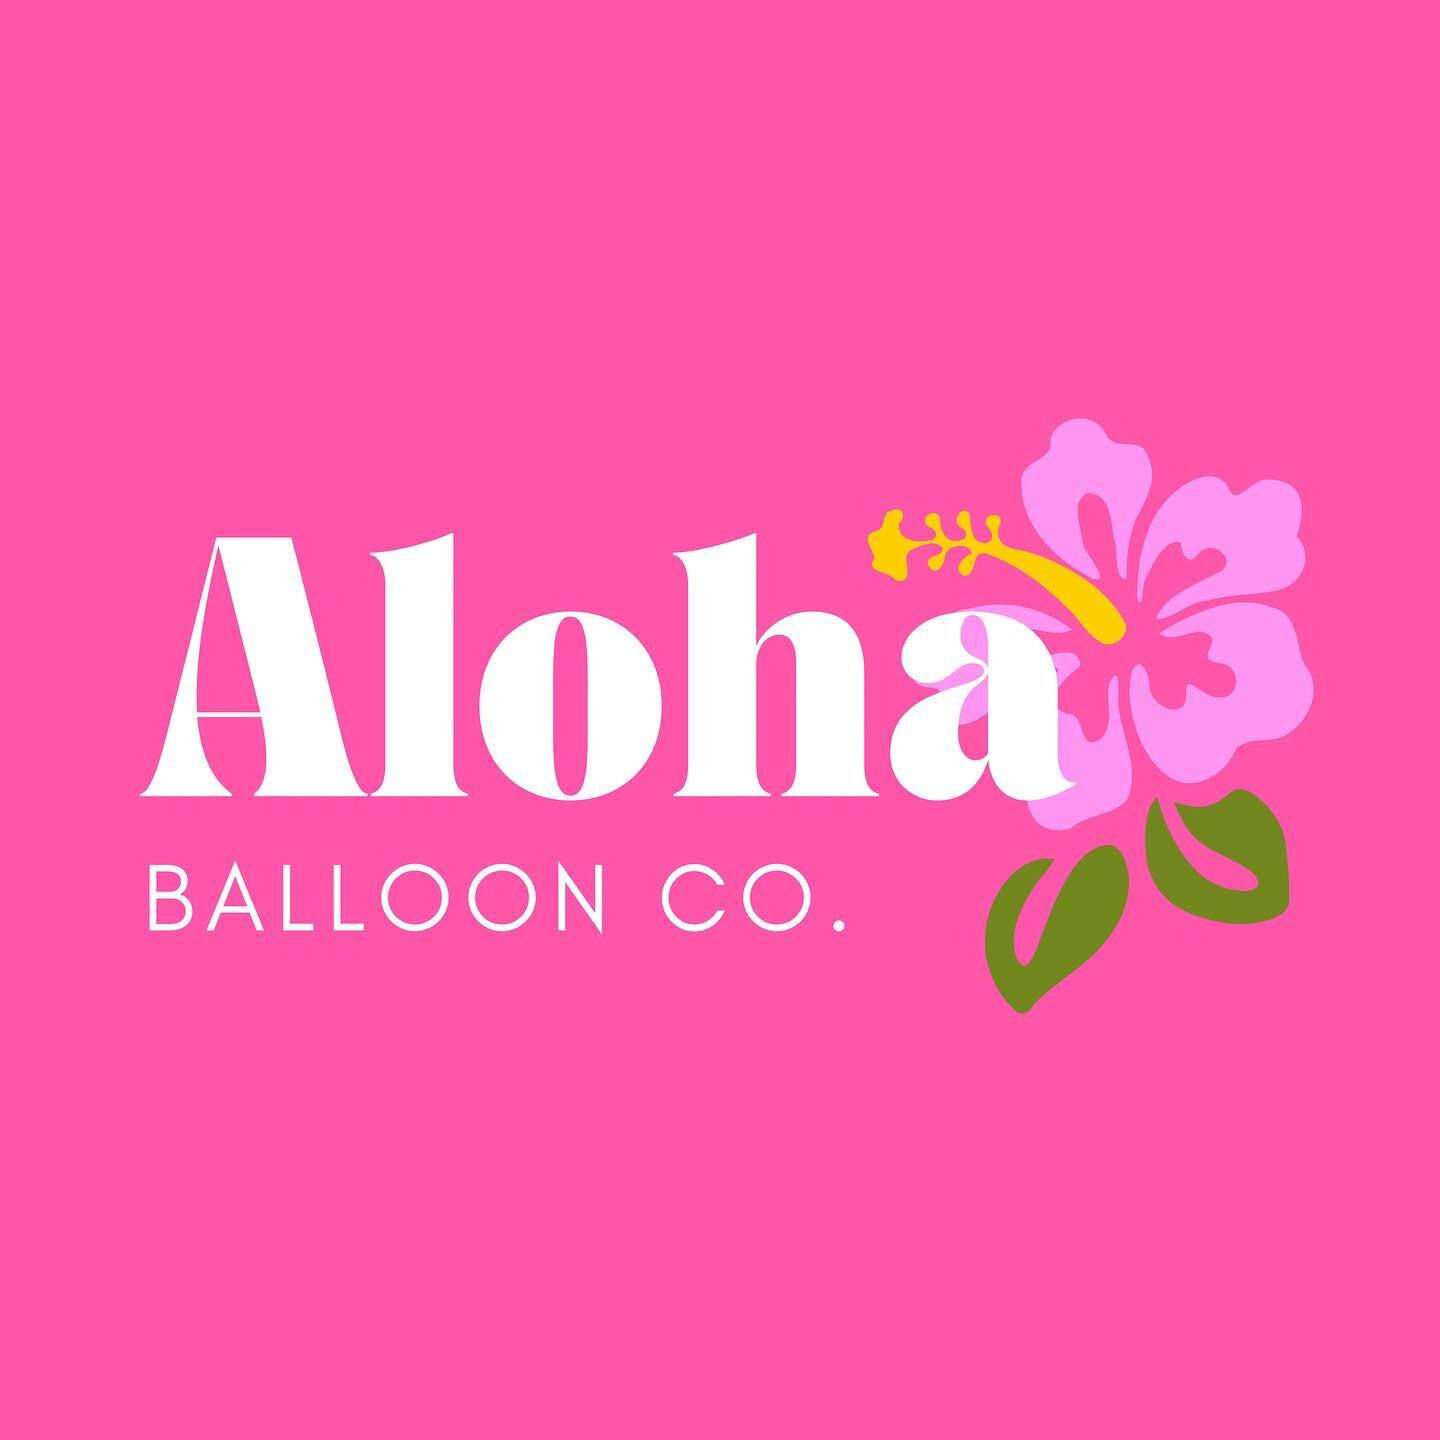 Aloha🌺

I&rsquo;m so happy to announce Mayberry Balloon Co. has rebranded to Aloha Balloon Co! I&rsquo;m thrilled to begin this new chapter with a new name as I move back to Hawaii!

Make sure to tell all your friends in Hawaii about Aloha Balloon C